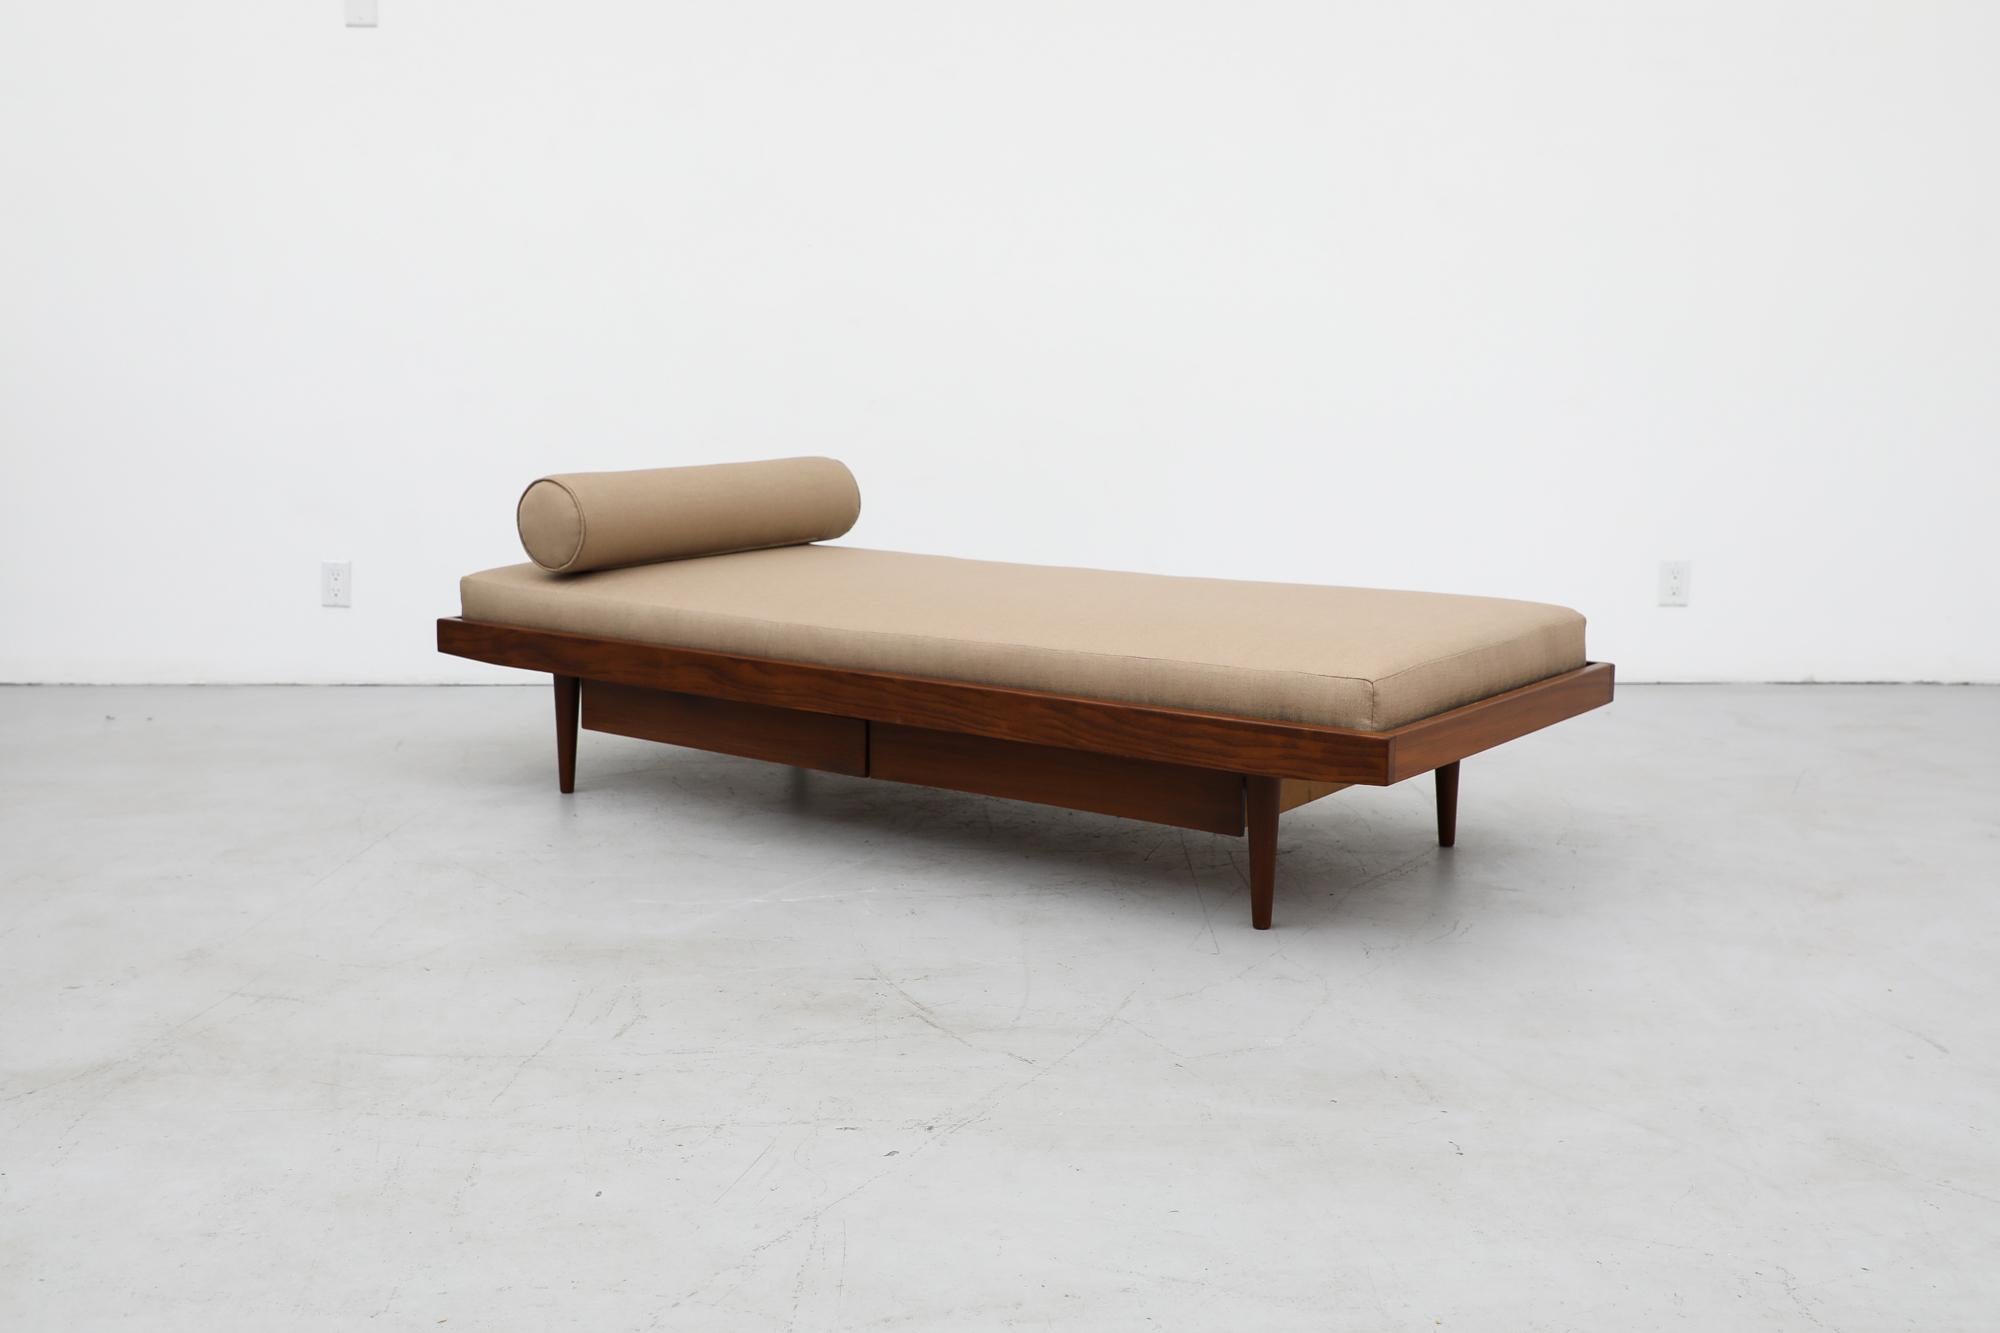 Dutch Midcentury Pierre Chapo Inspired Teak Daybed with Storage Drawers